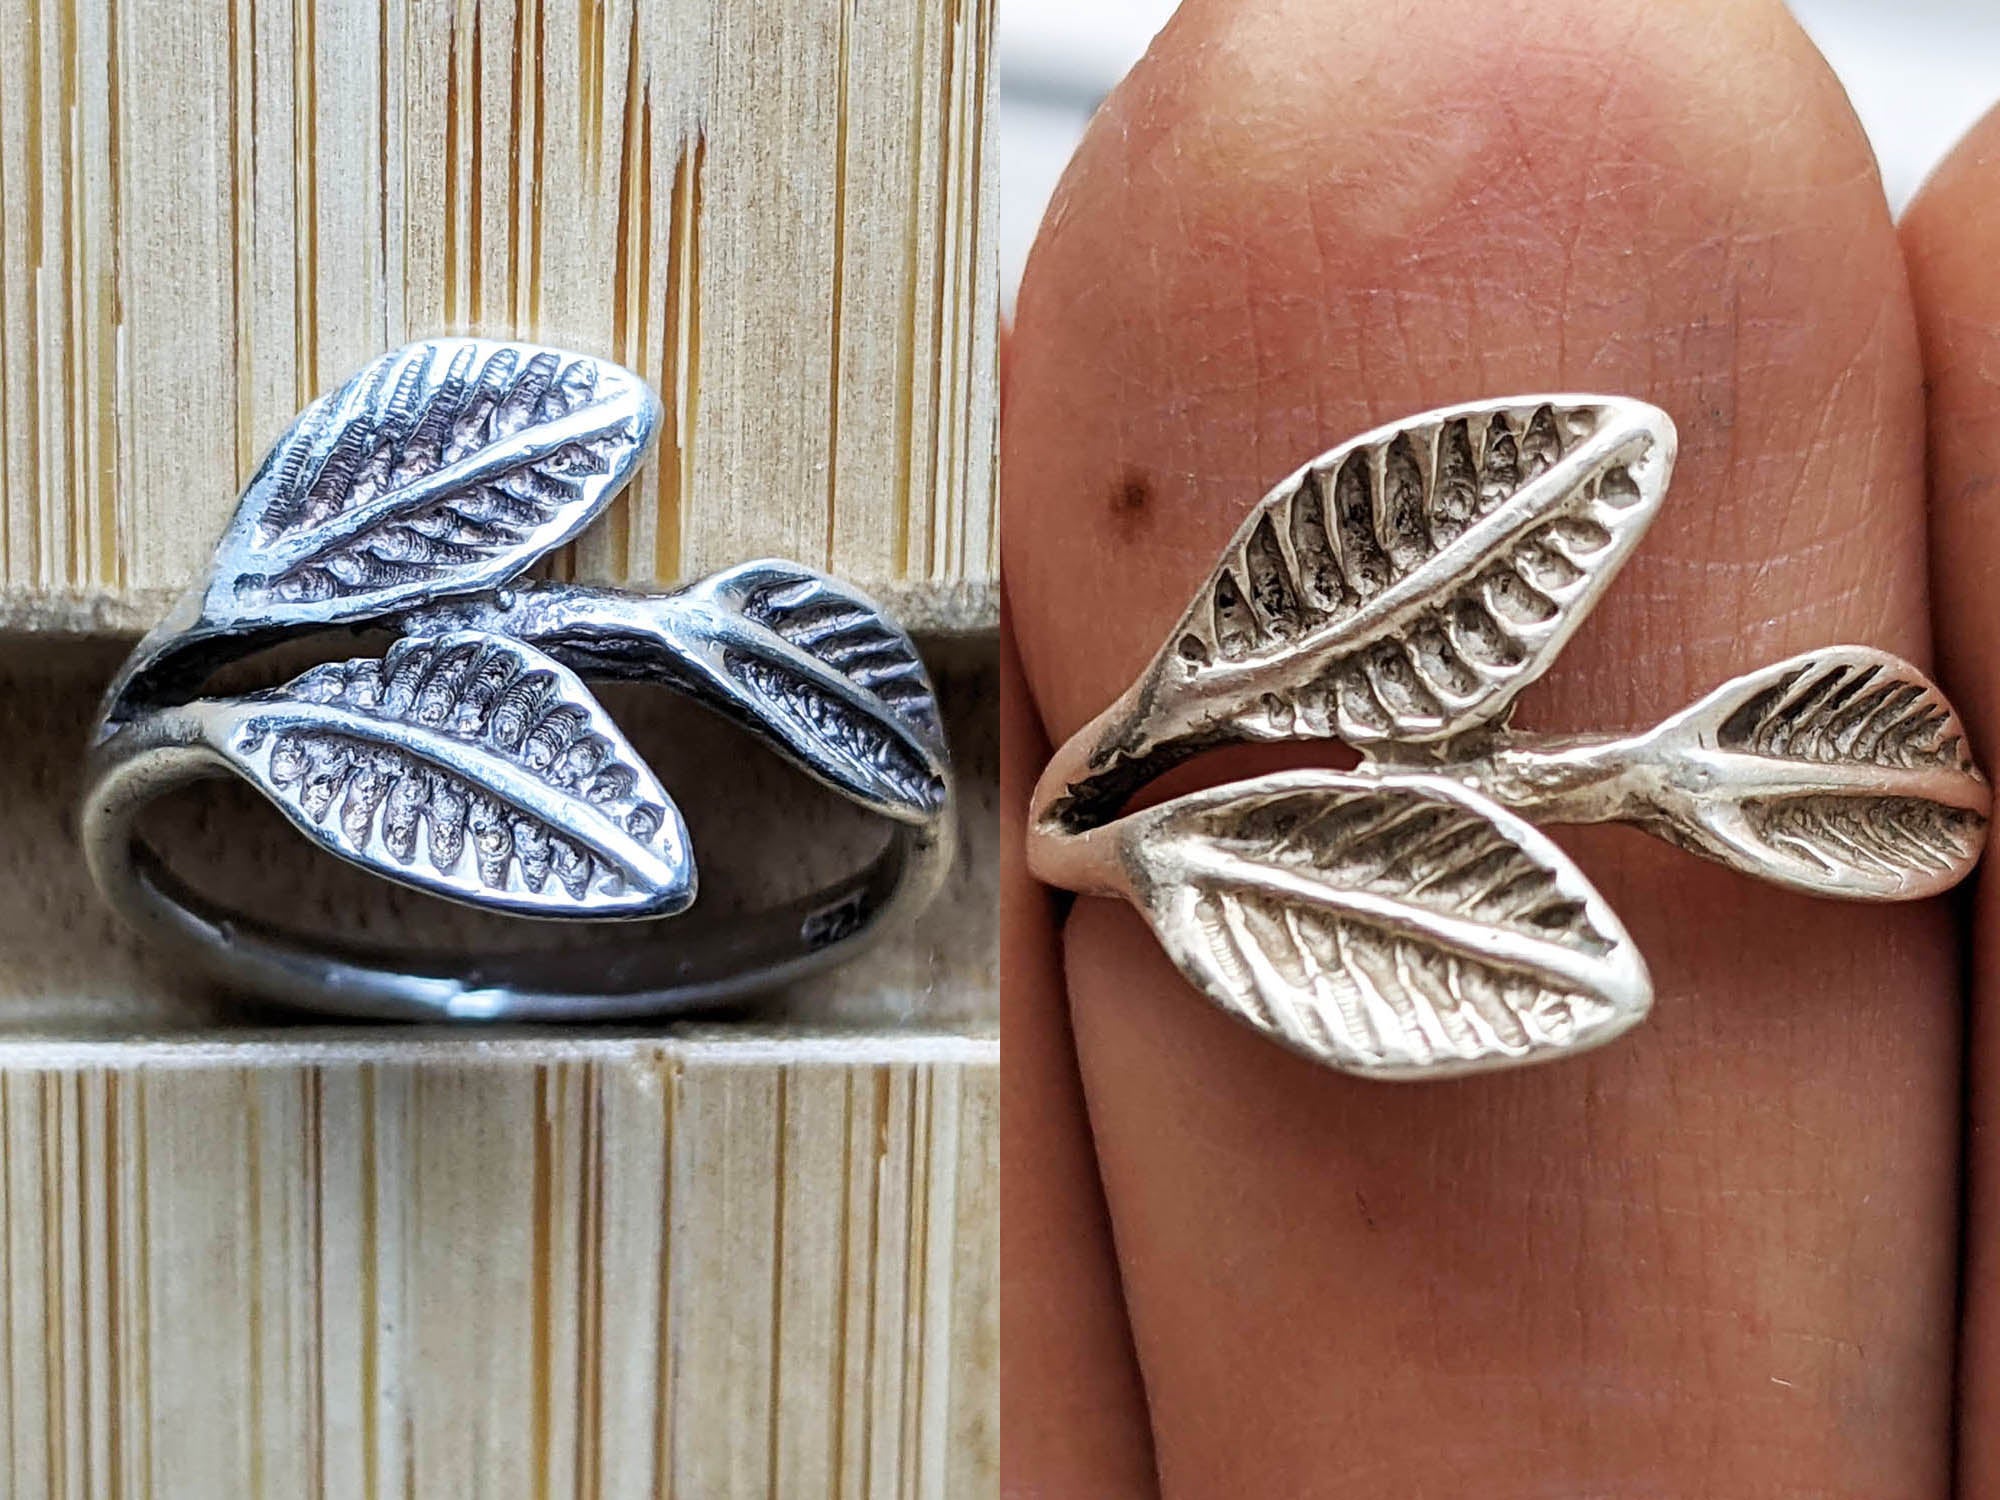 A tarnished silver ring, before and after cleaning.